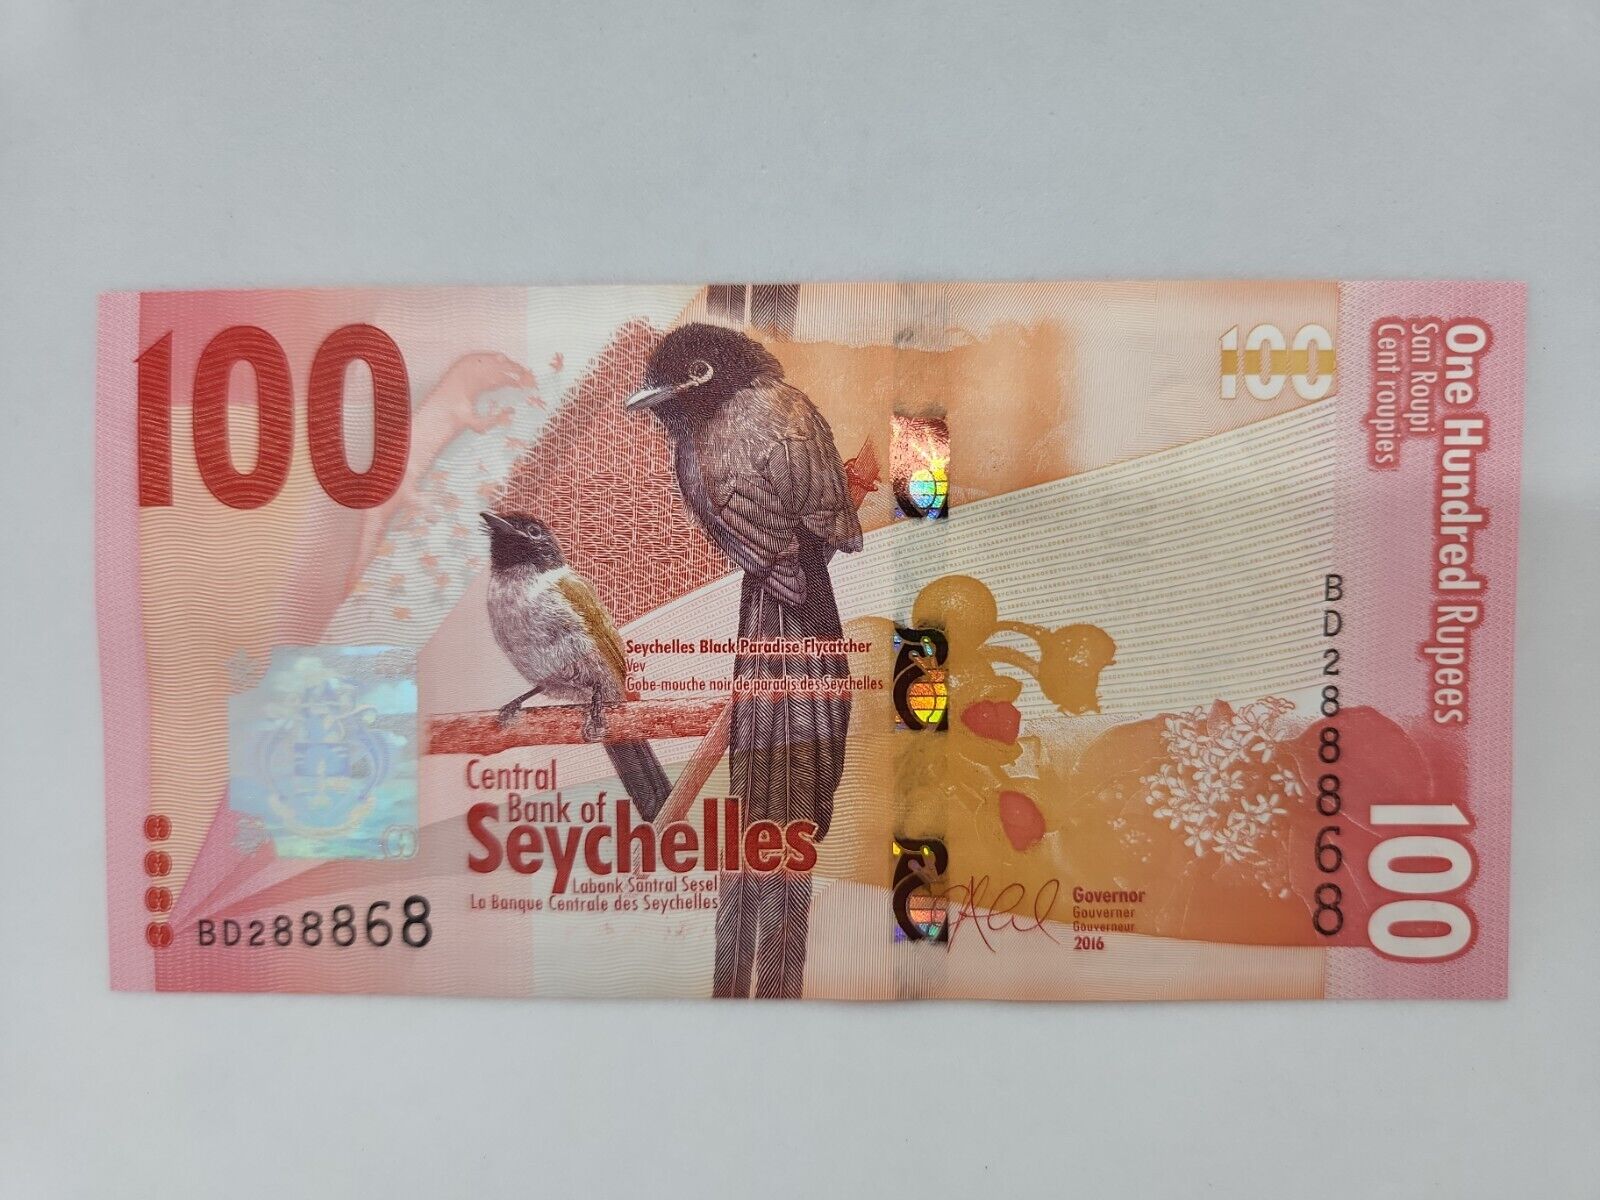 Seychelles 100 Rupees Banknote , 2016, Bd288868